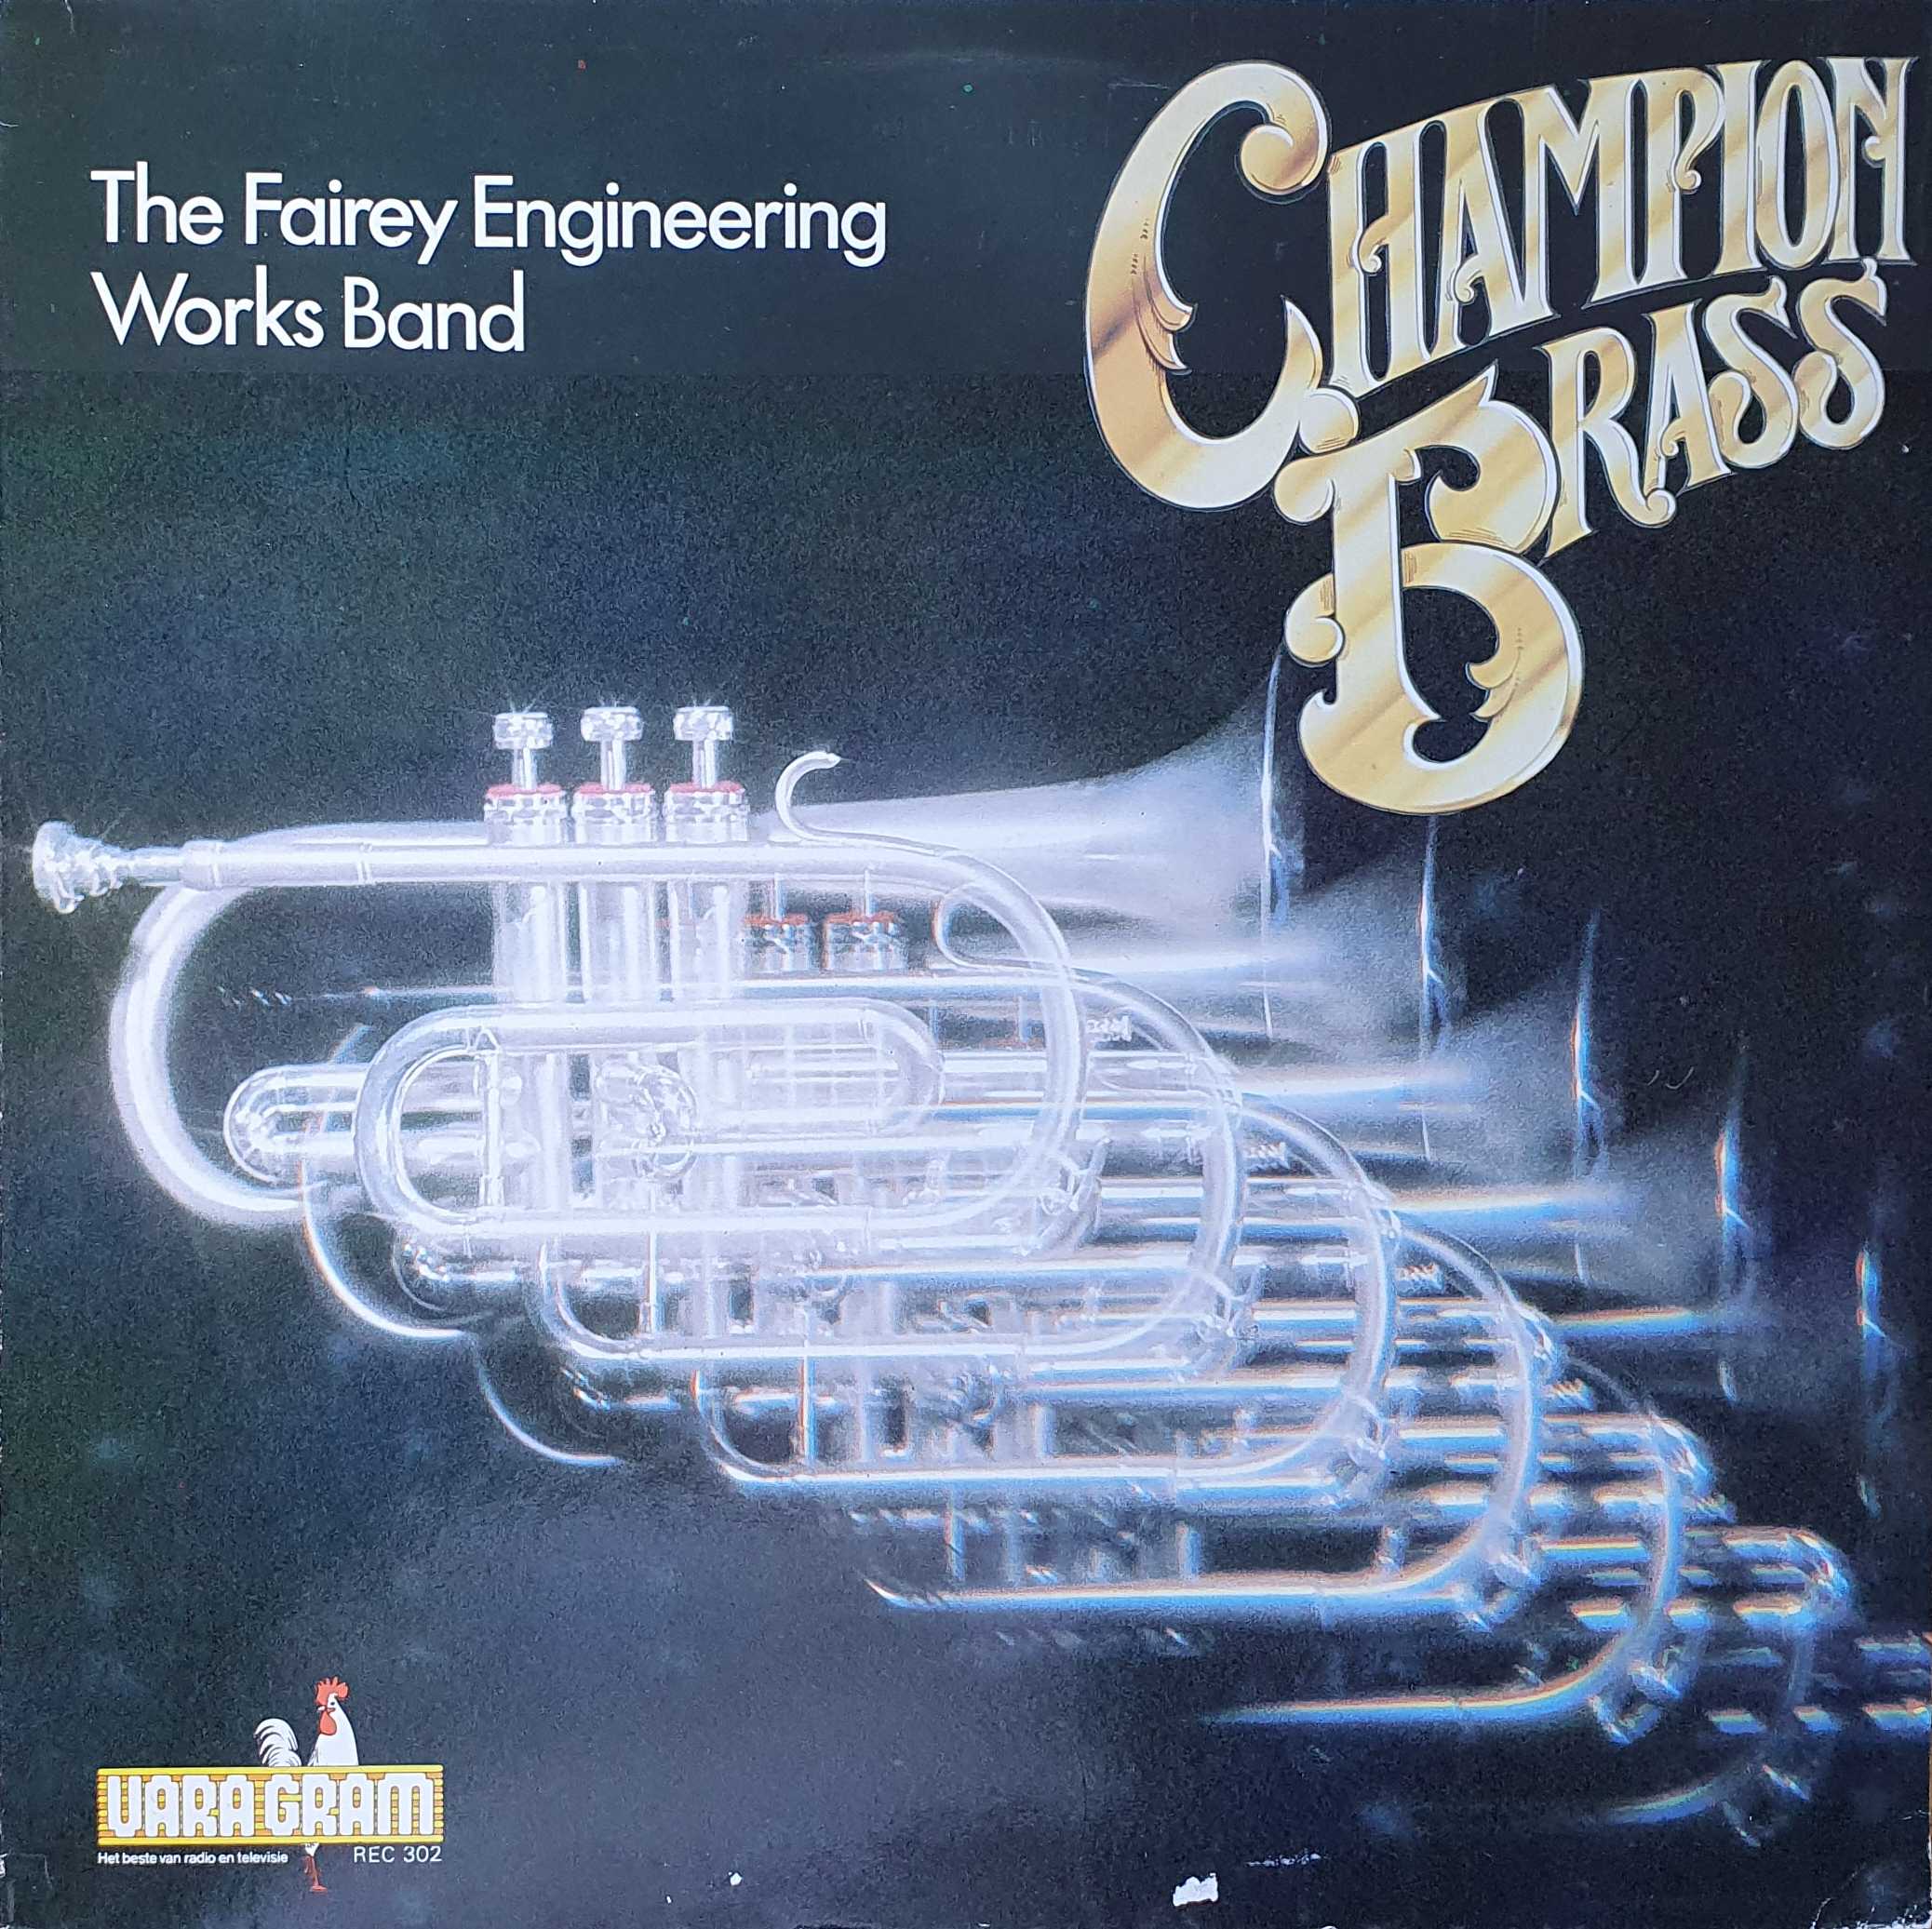 Picture of REC 302-iD The Fairey Engineering Works band - Champion brass (Dutch import) by artist Various from the BBC albums - Records and Tapes library